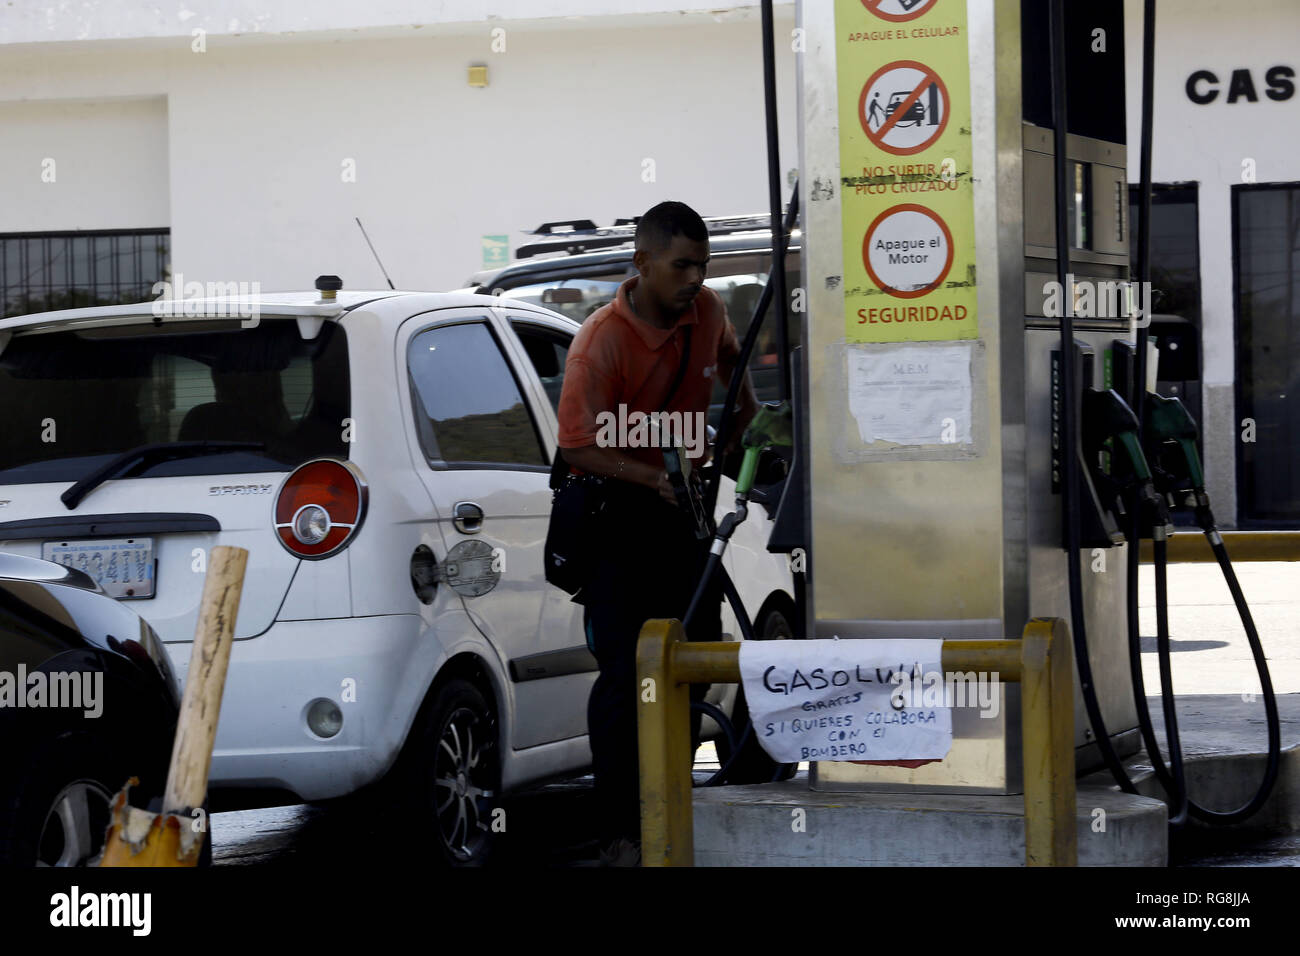 San Diego, Carabobo, Venezuela. 28th Jan, 2019. January 28, 2019. At the Castillito service station, Mauro Ramirez, an island operator, decided to place a notice to customers where he offers gasoline for free and asks them to collaborate with the ''fireman'', given the low cost of gasoline, explained that way he earns more money since his boss refuses to pay his salary since the fuel profit margin is not enough to cover the expenses. In the San Diego municipality of the Carabobo state. Photo: Juan Carlos Hernandez Credit: Juan Carlos Hernandez/ZUMA Wire/Alamy Live News Stock Photo